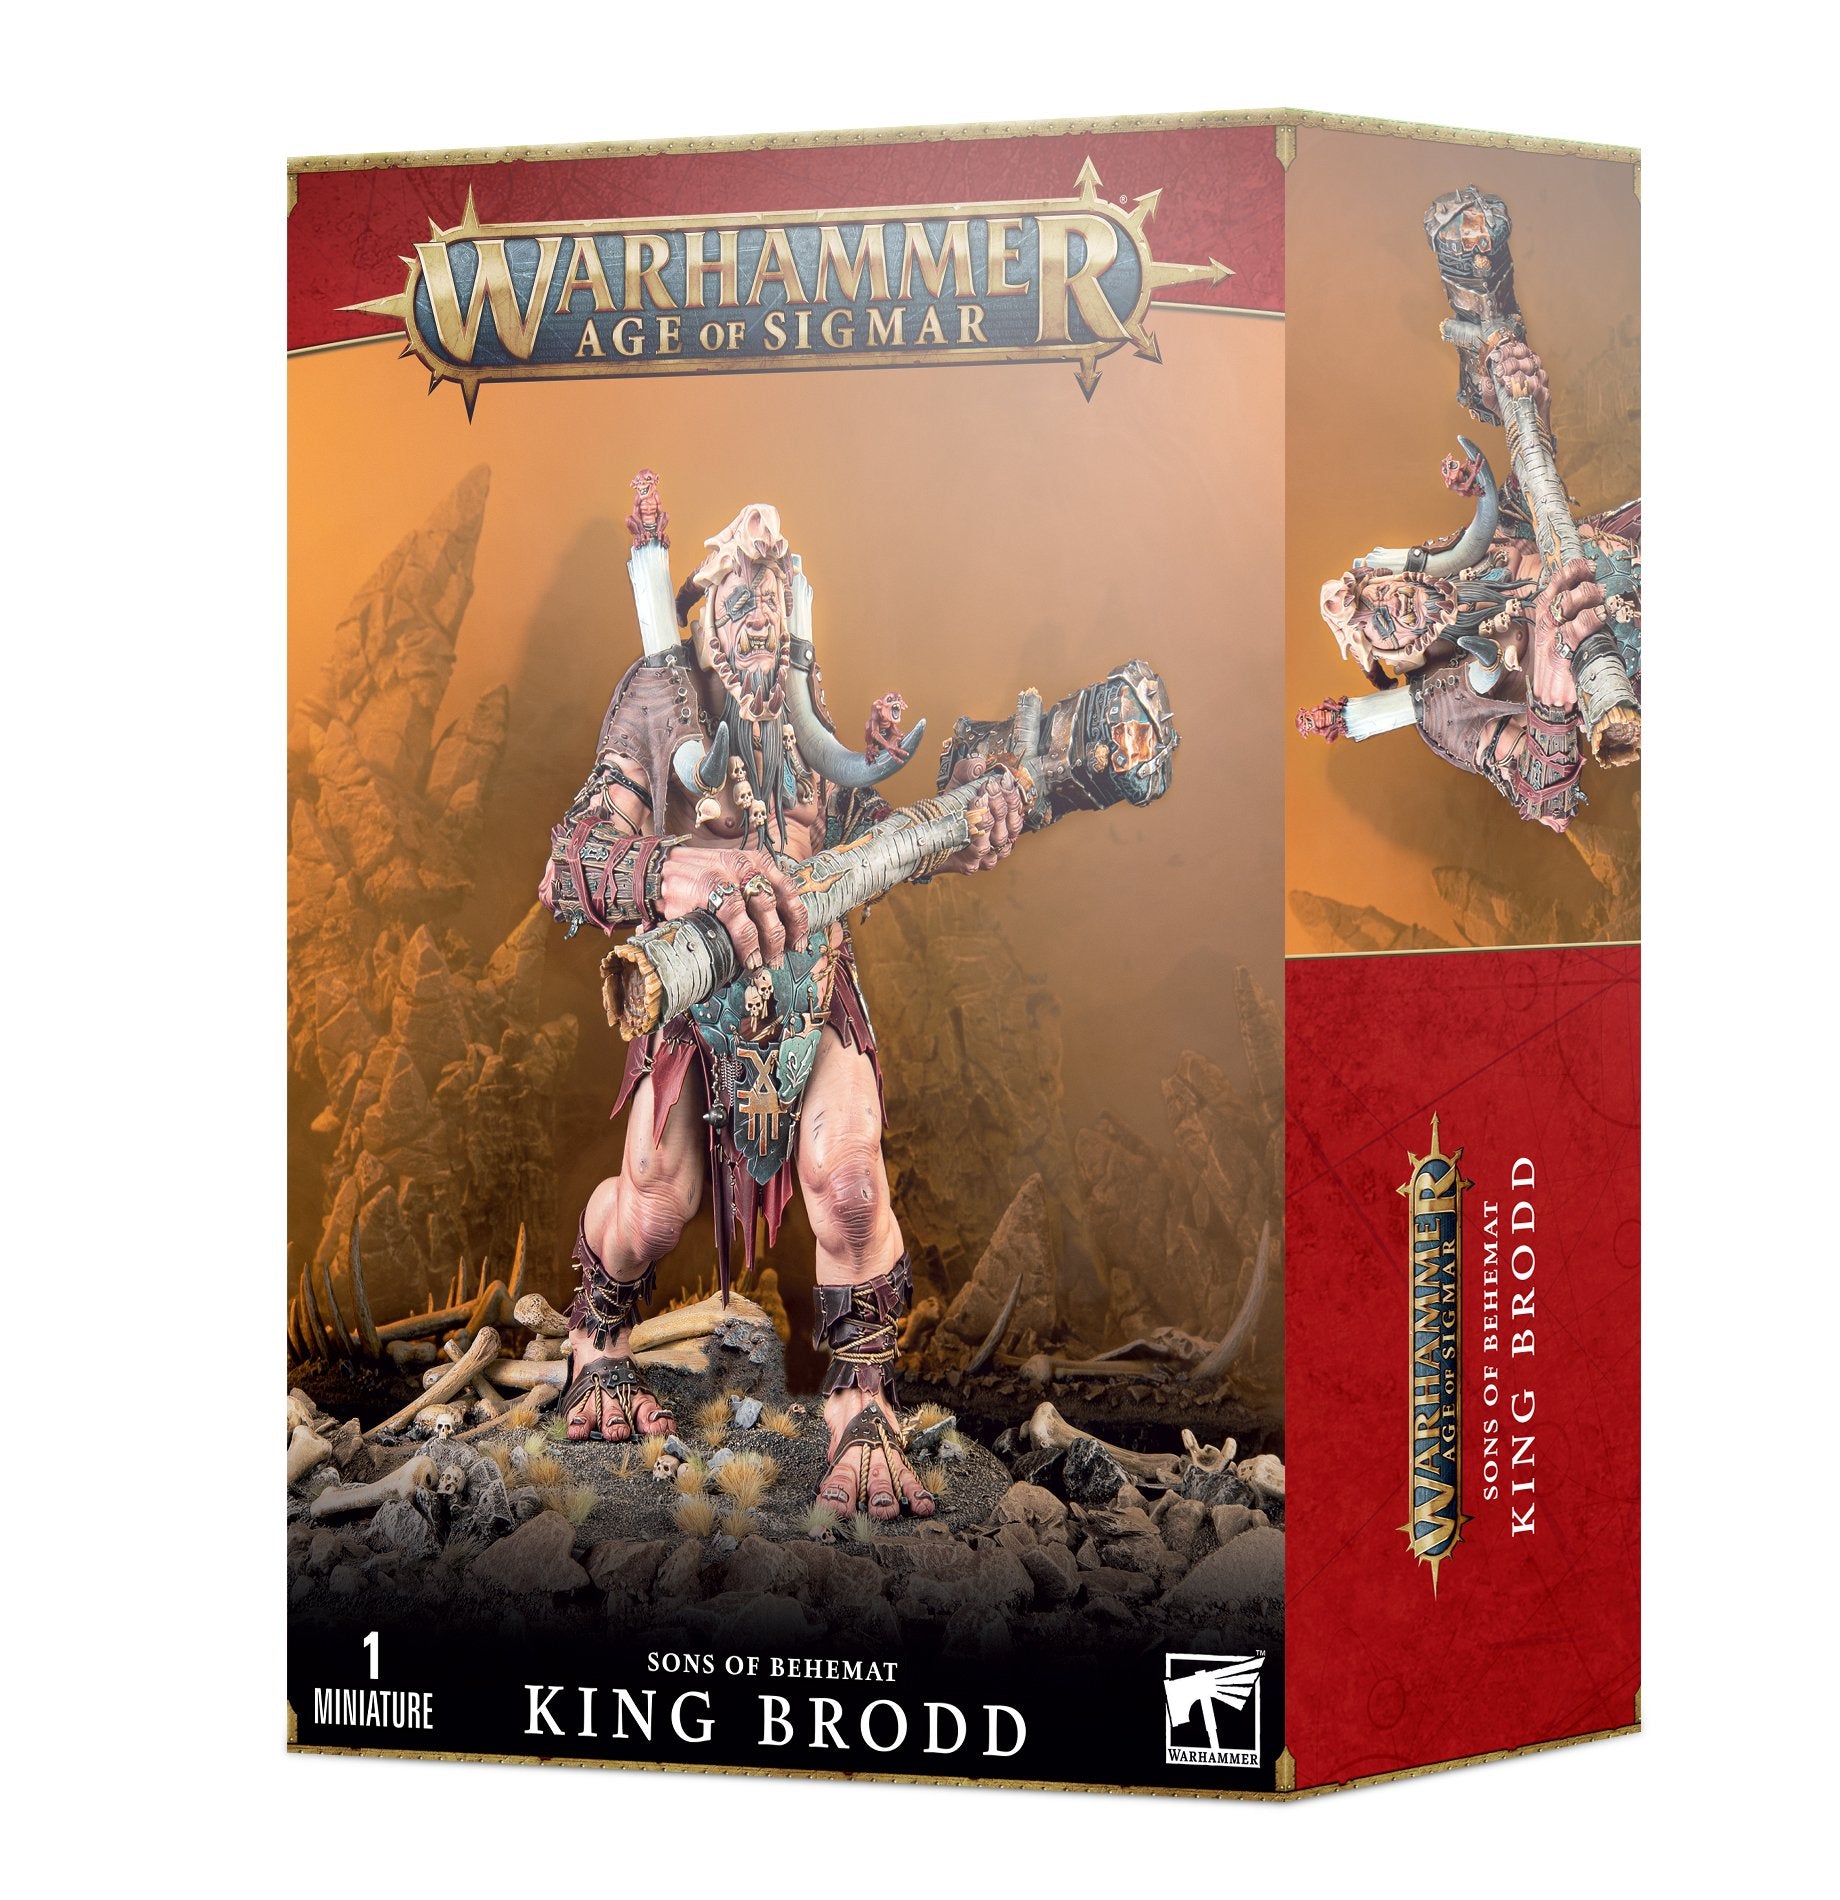 King Brodd Sons of Behemat age of sigmar